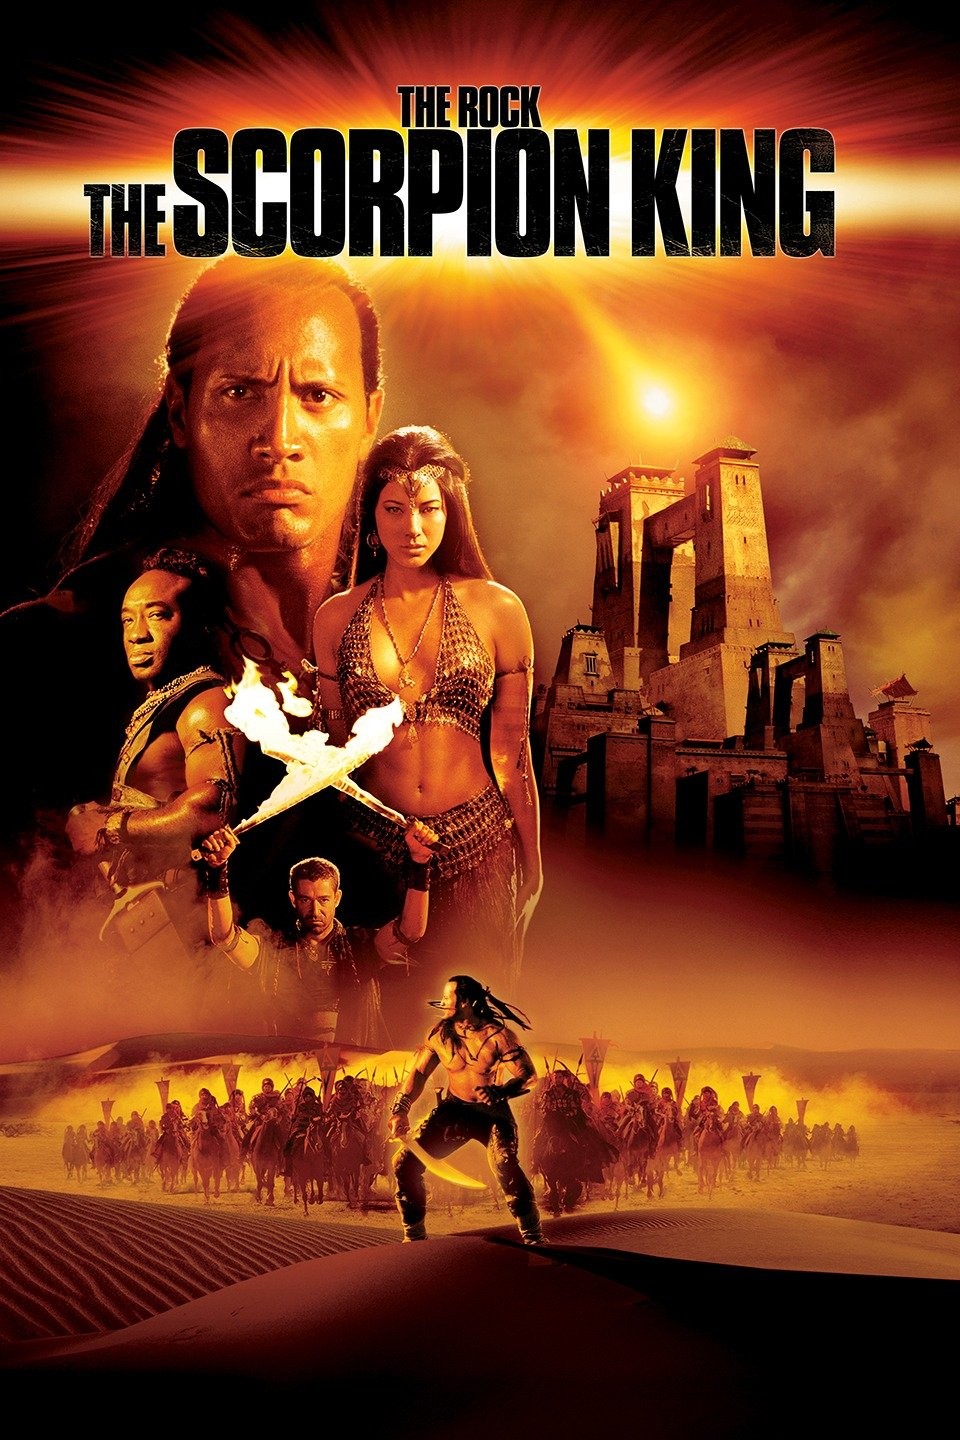 The Scorpion King 2: Rise of a Warrior (Video 2008) - IMDb